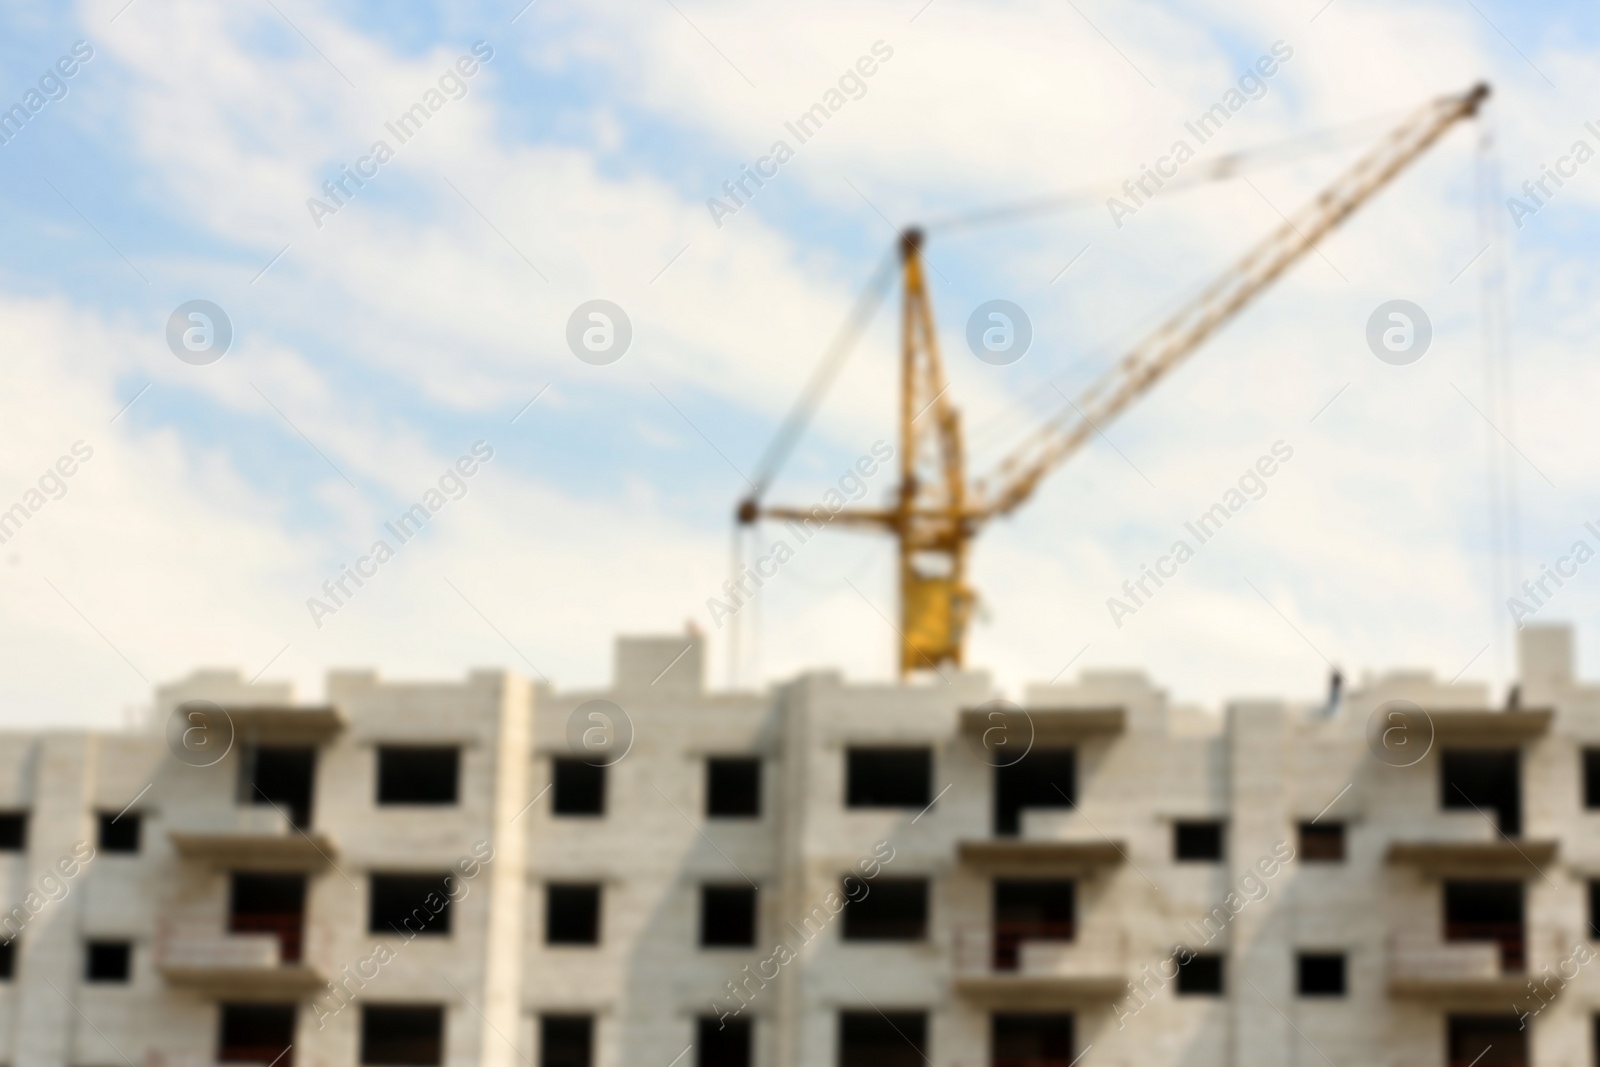 Photo of Blurred view of unfinished building and construction crane outdoors